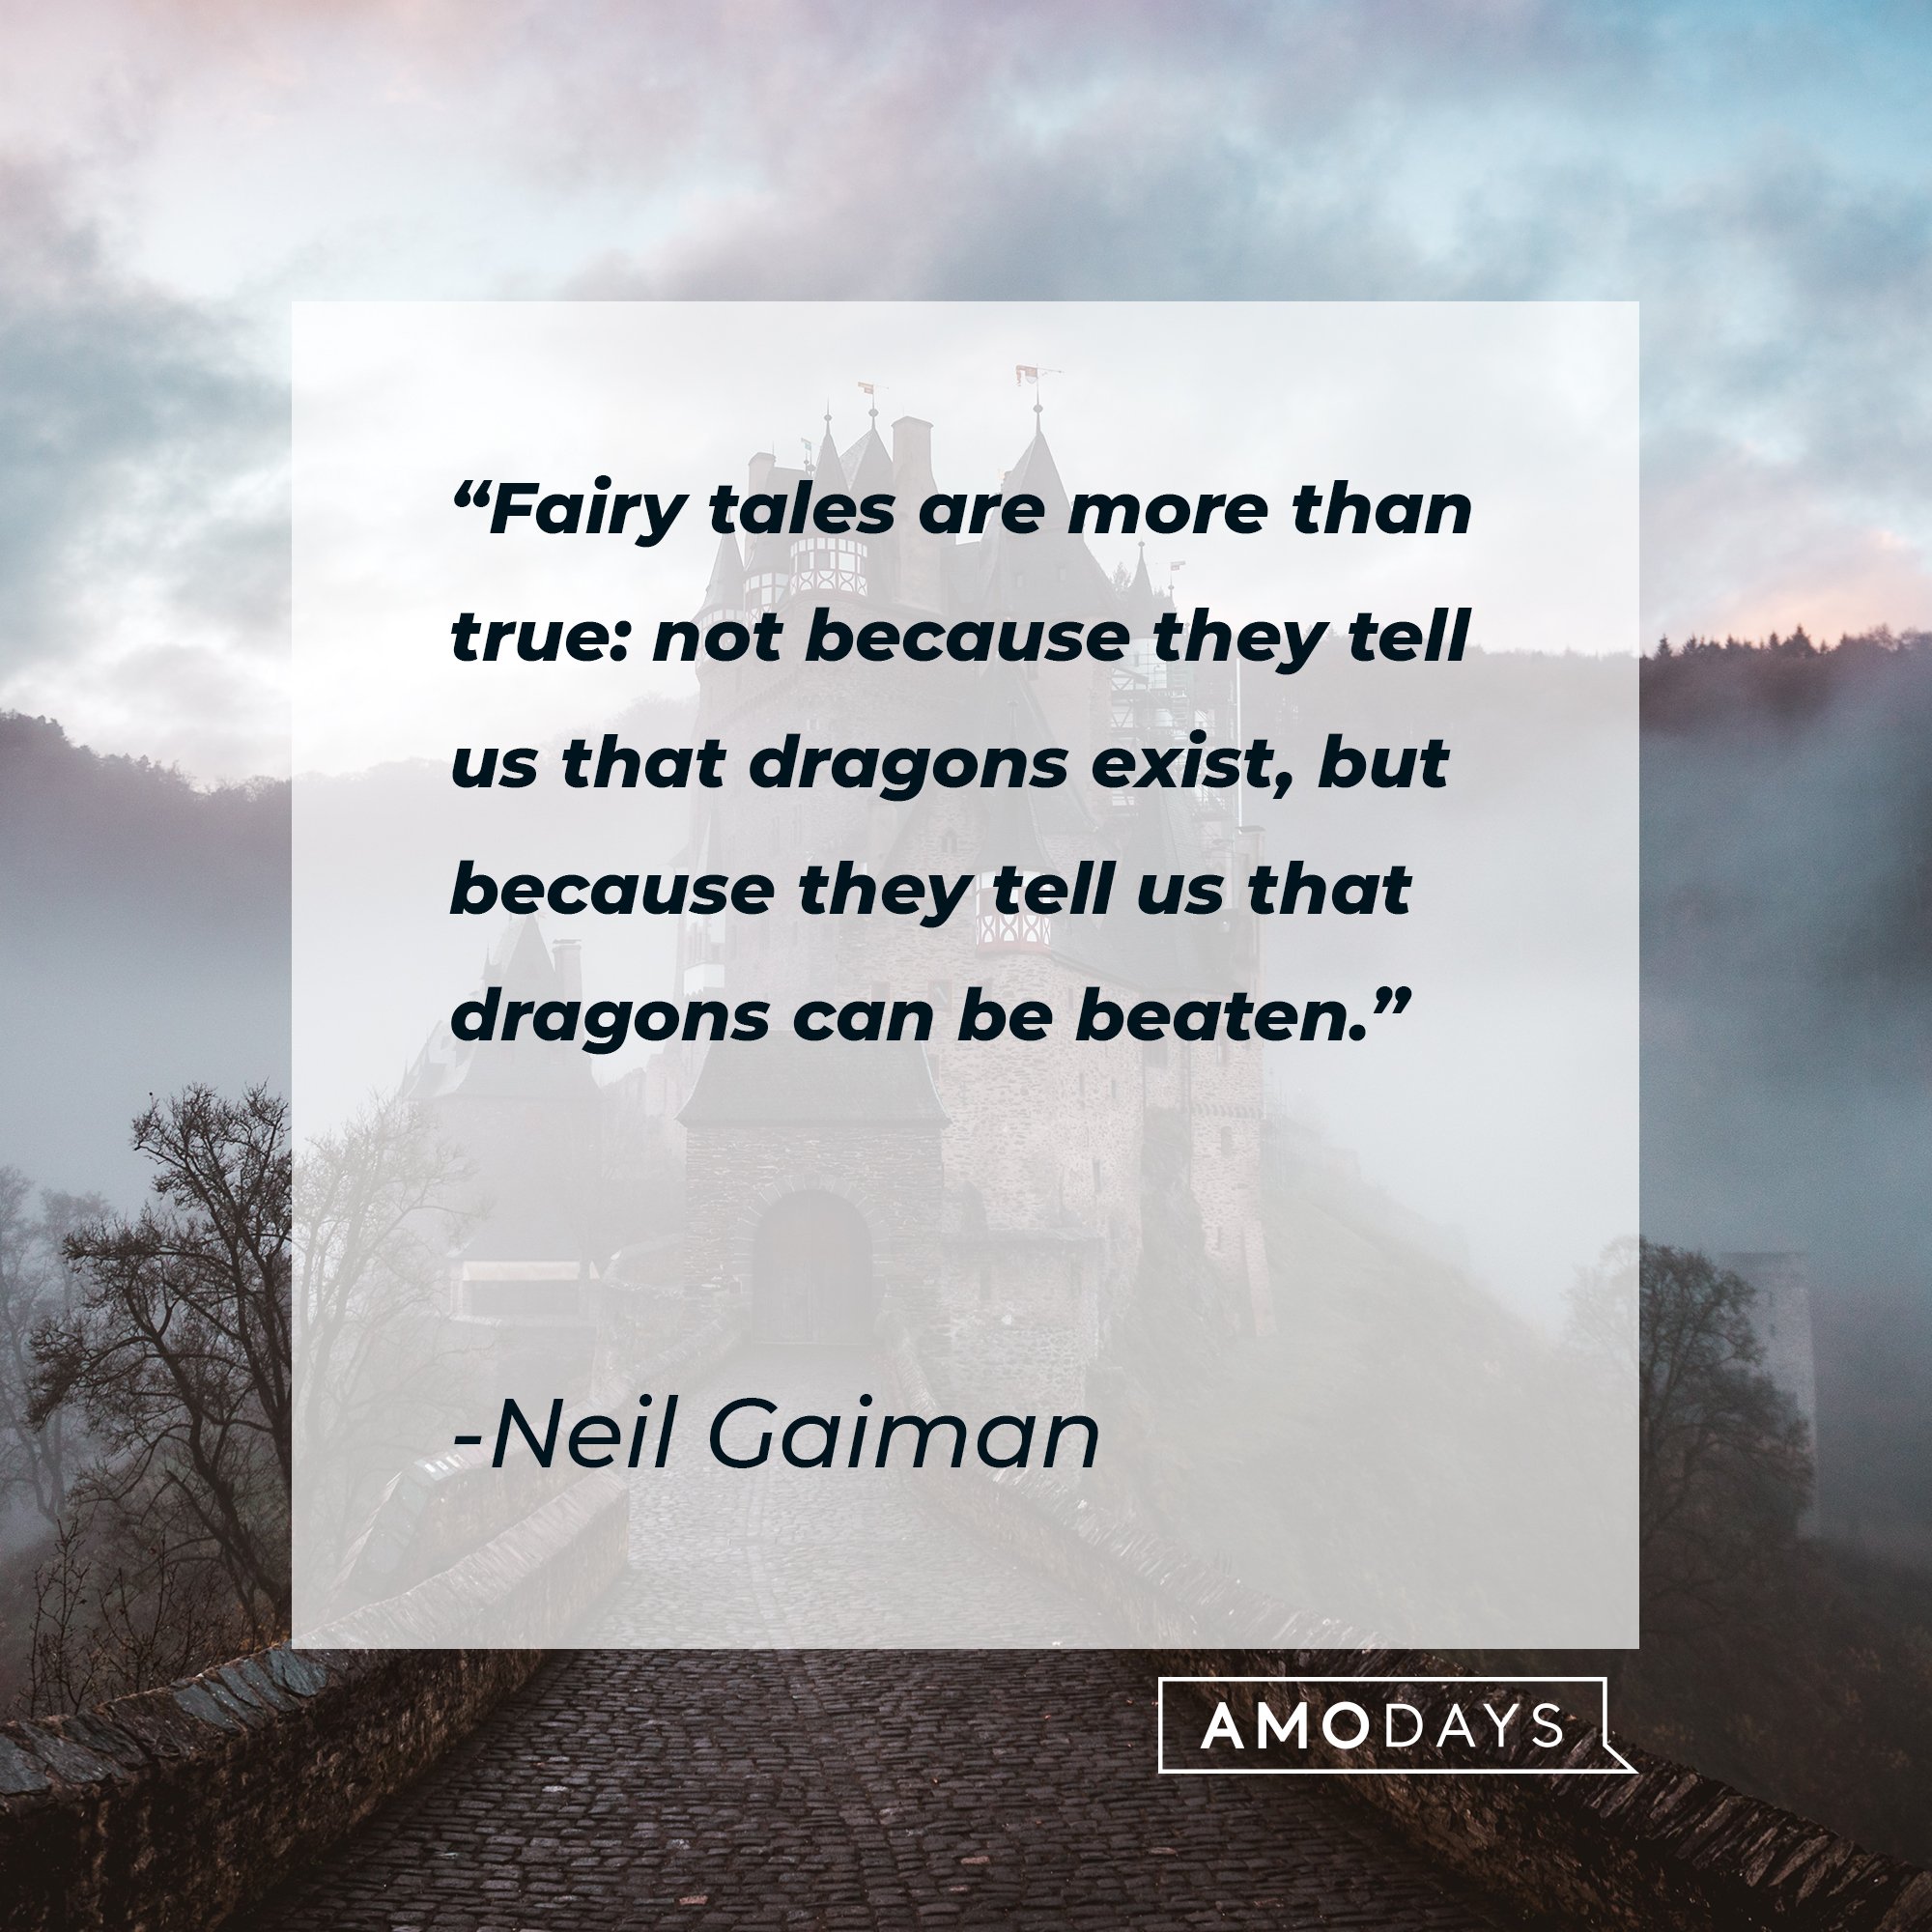 Neil Gaiman's quote: "Fairy tales are more than true: not because they tell us that dragons exist, but because they tell us that dragons can be beaten." | Image: AmoDays 